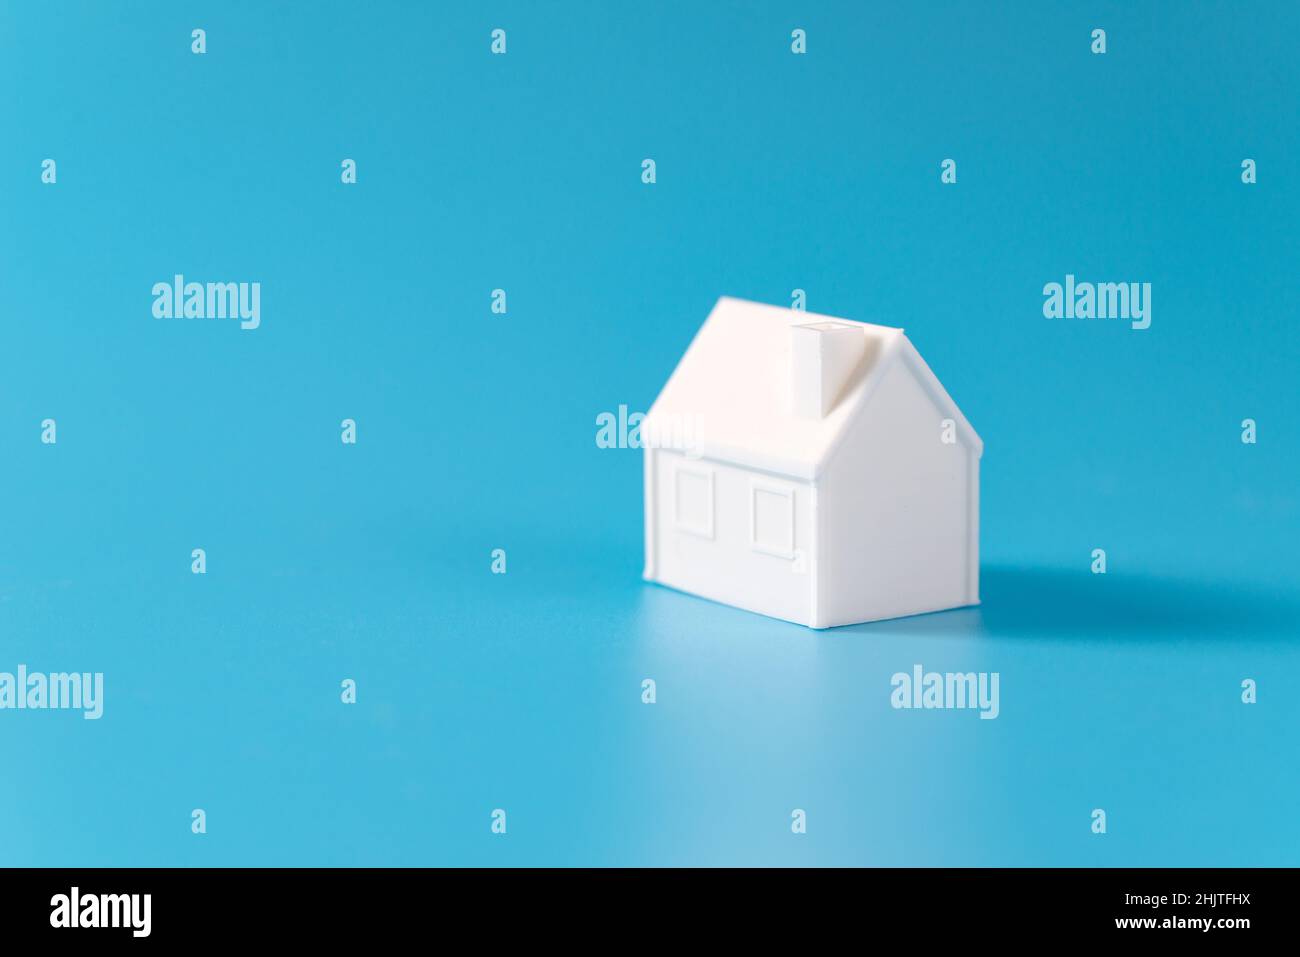 Real estate housing property concept Stock Photo